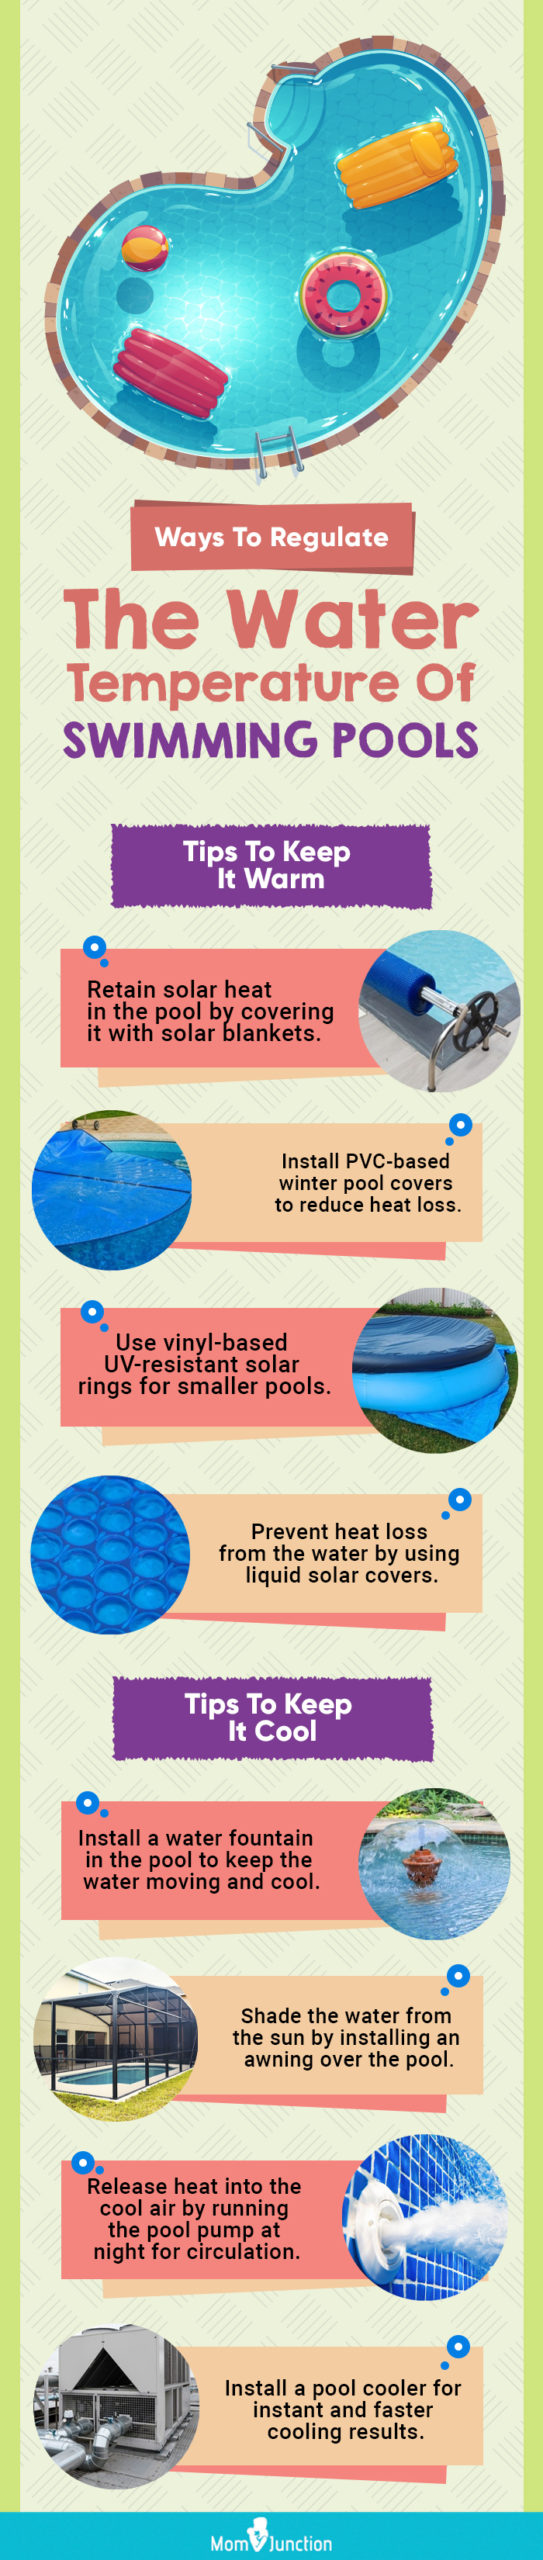 Ways To Regulate The Water Temperature Of Swimming Pools (infographic)